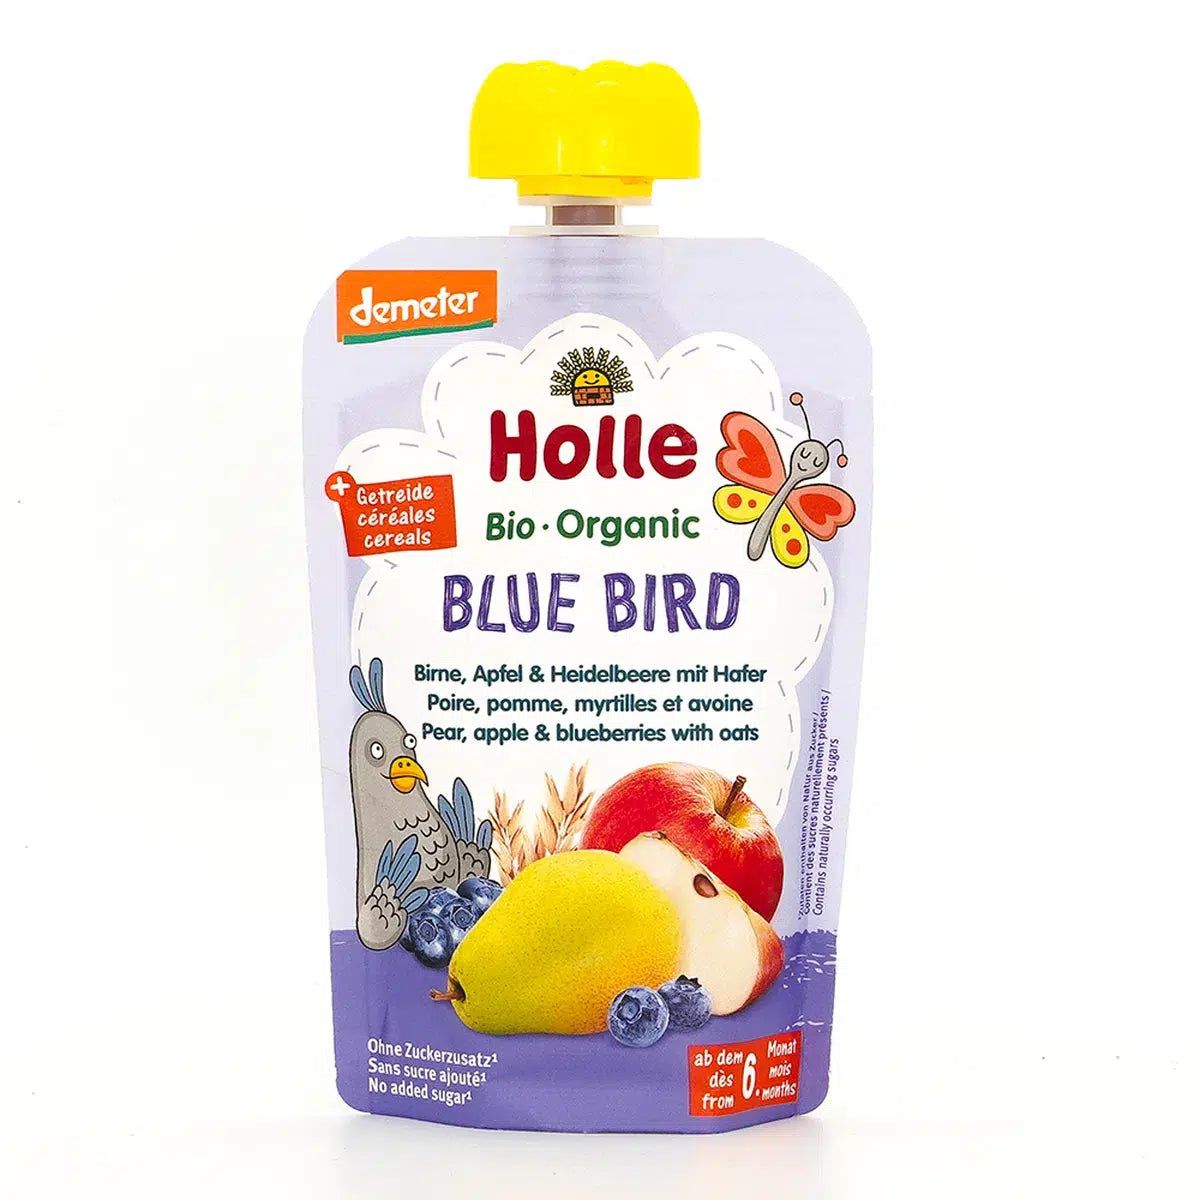 Holle Blue Bird: Pear, Apple & Blueberries with Oats (6+ Months) - 12 Pouches